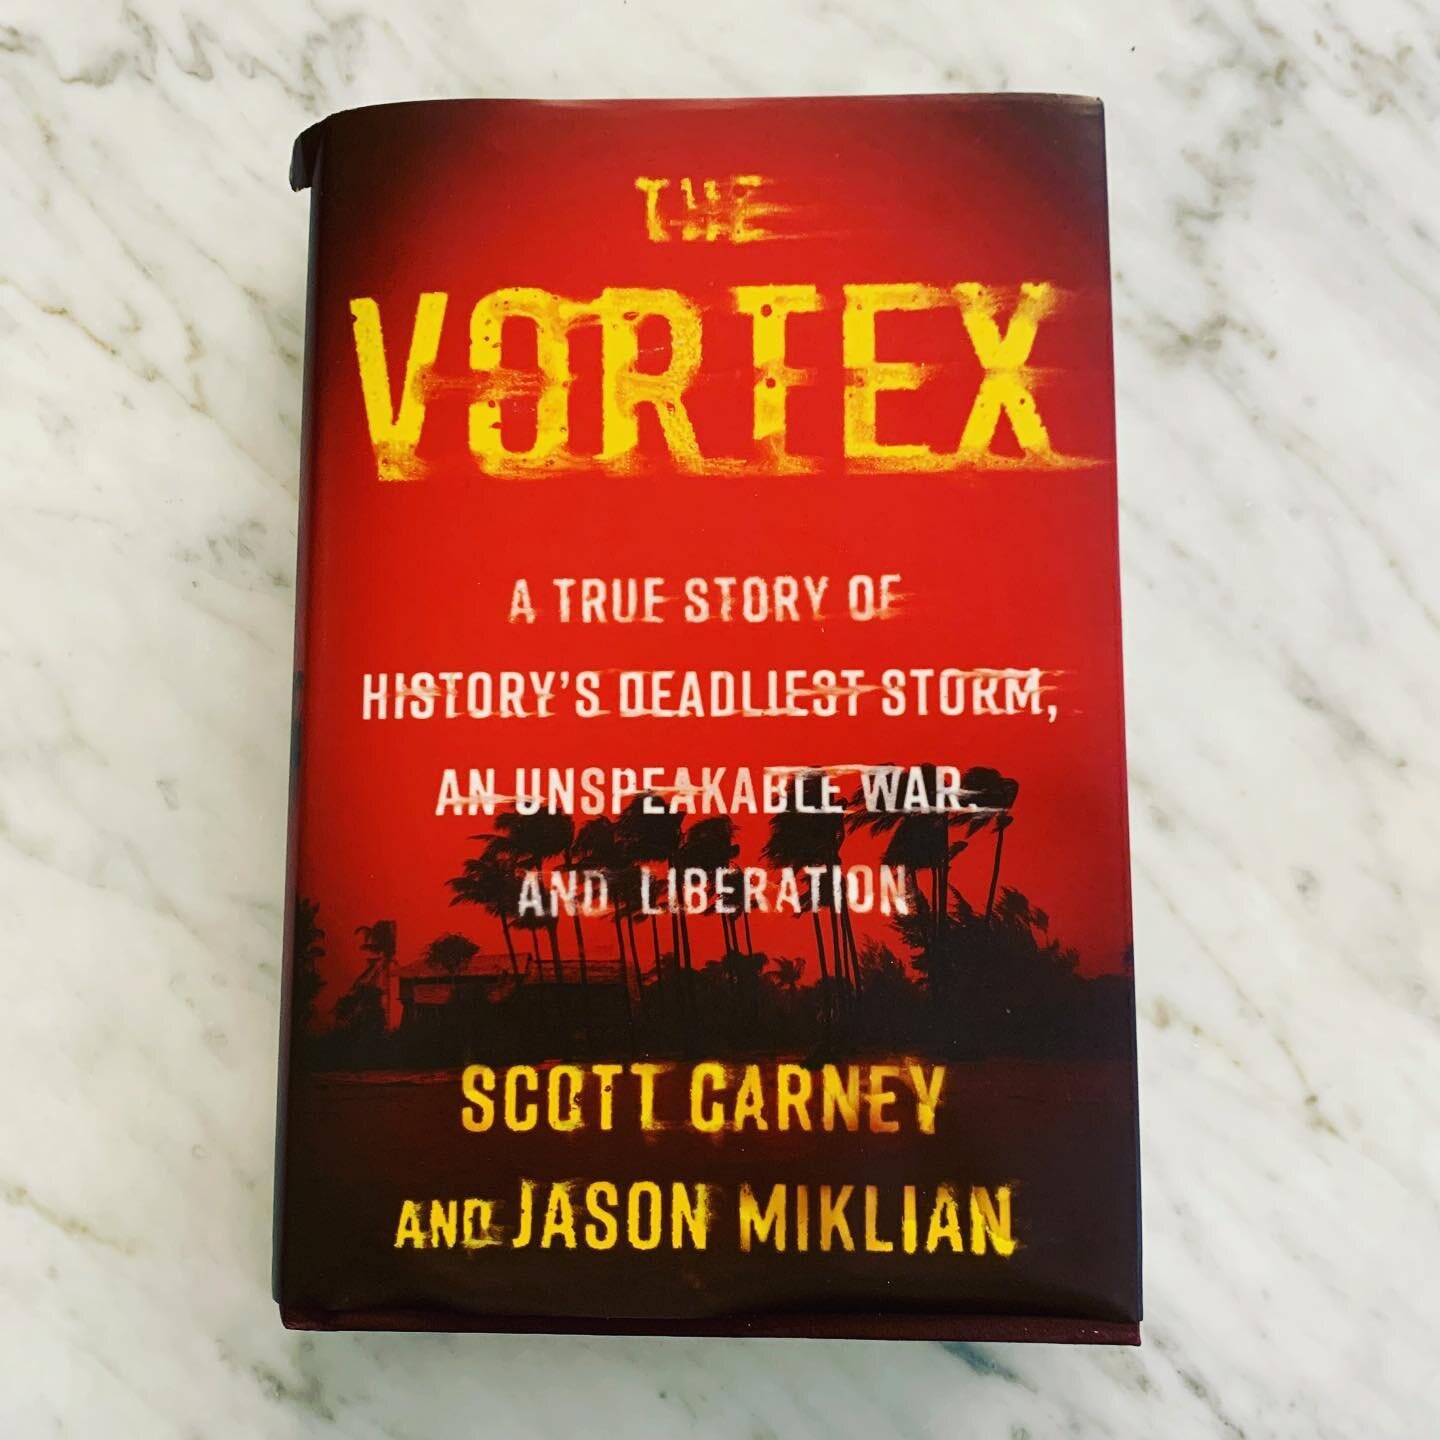 Hard to overstate how much I am loving this new book by @sgcarney and Jason Miklian. It starts with a storm but then becomes so much more as they follow captivating characters through hell and back. With everything going on in the world today with cl